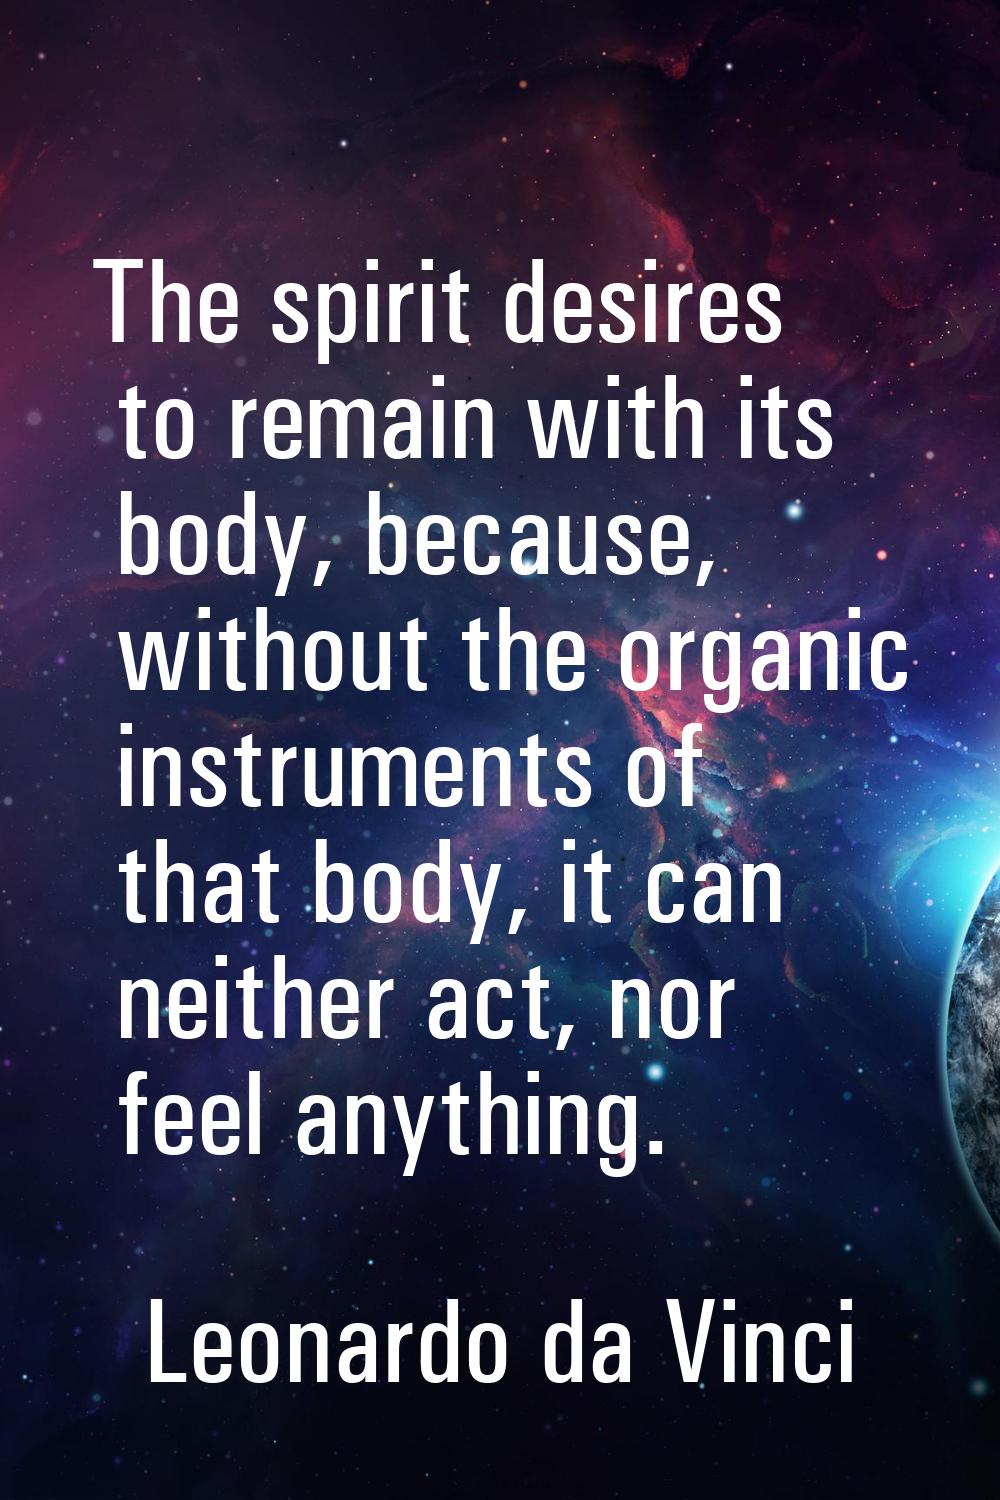 The spirit desires to remain with its body, because, without the organic instruments of that body, 